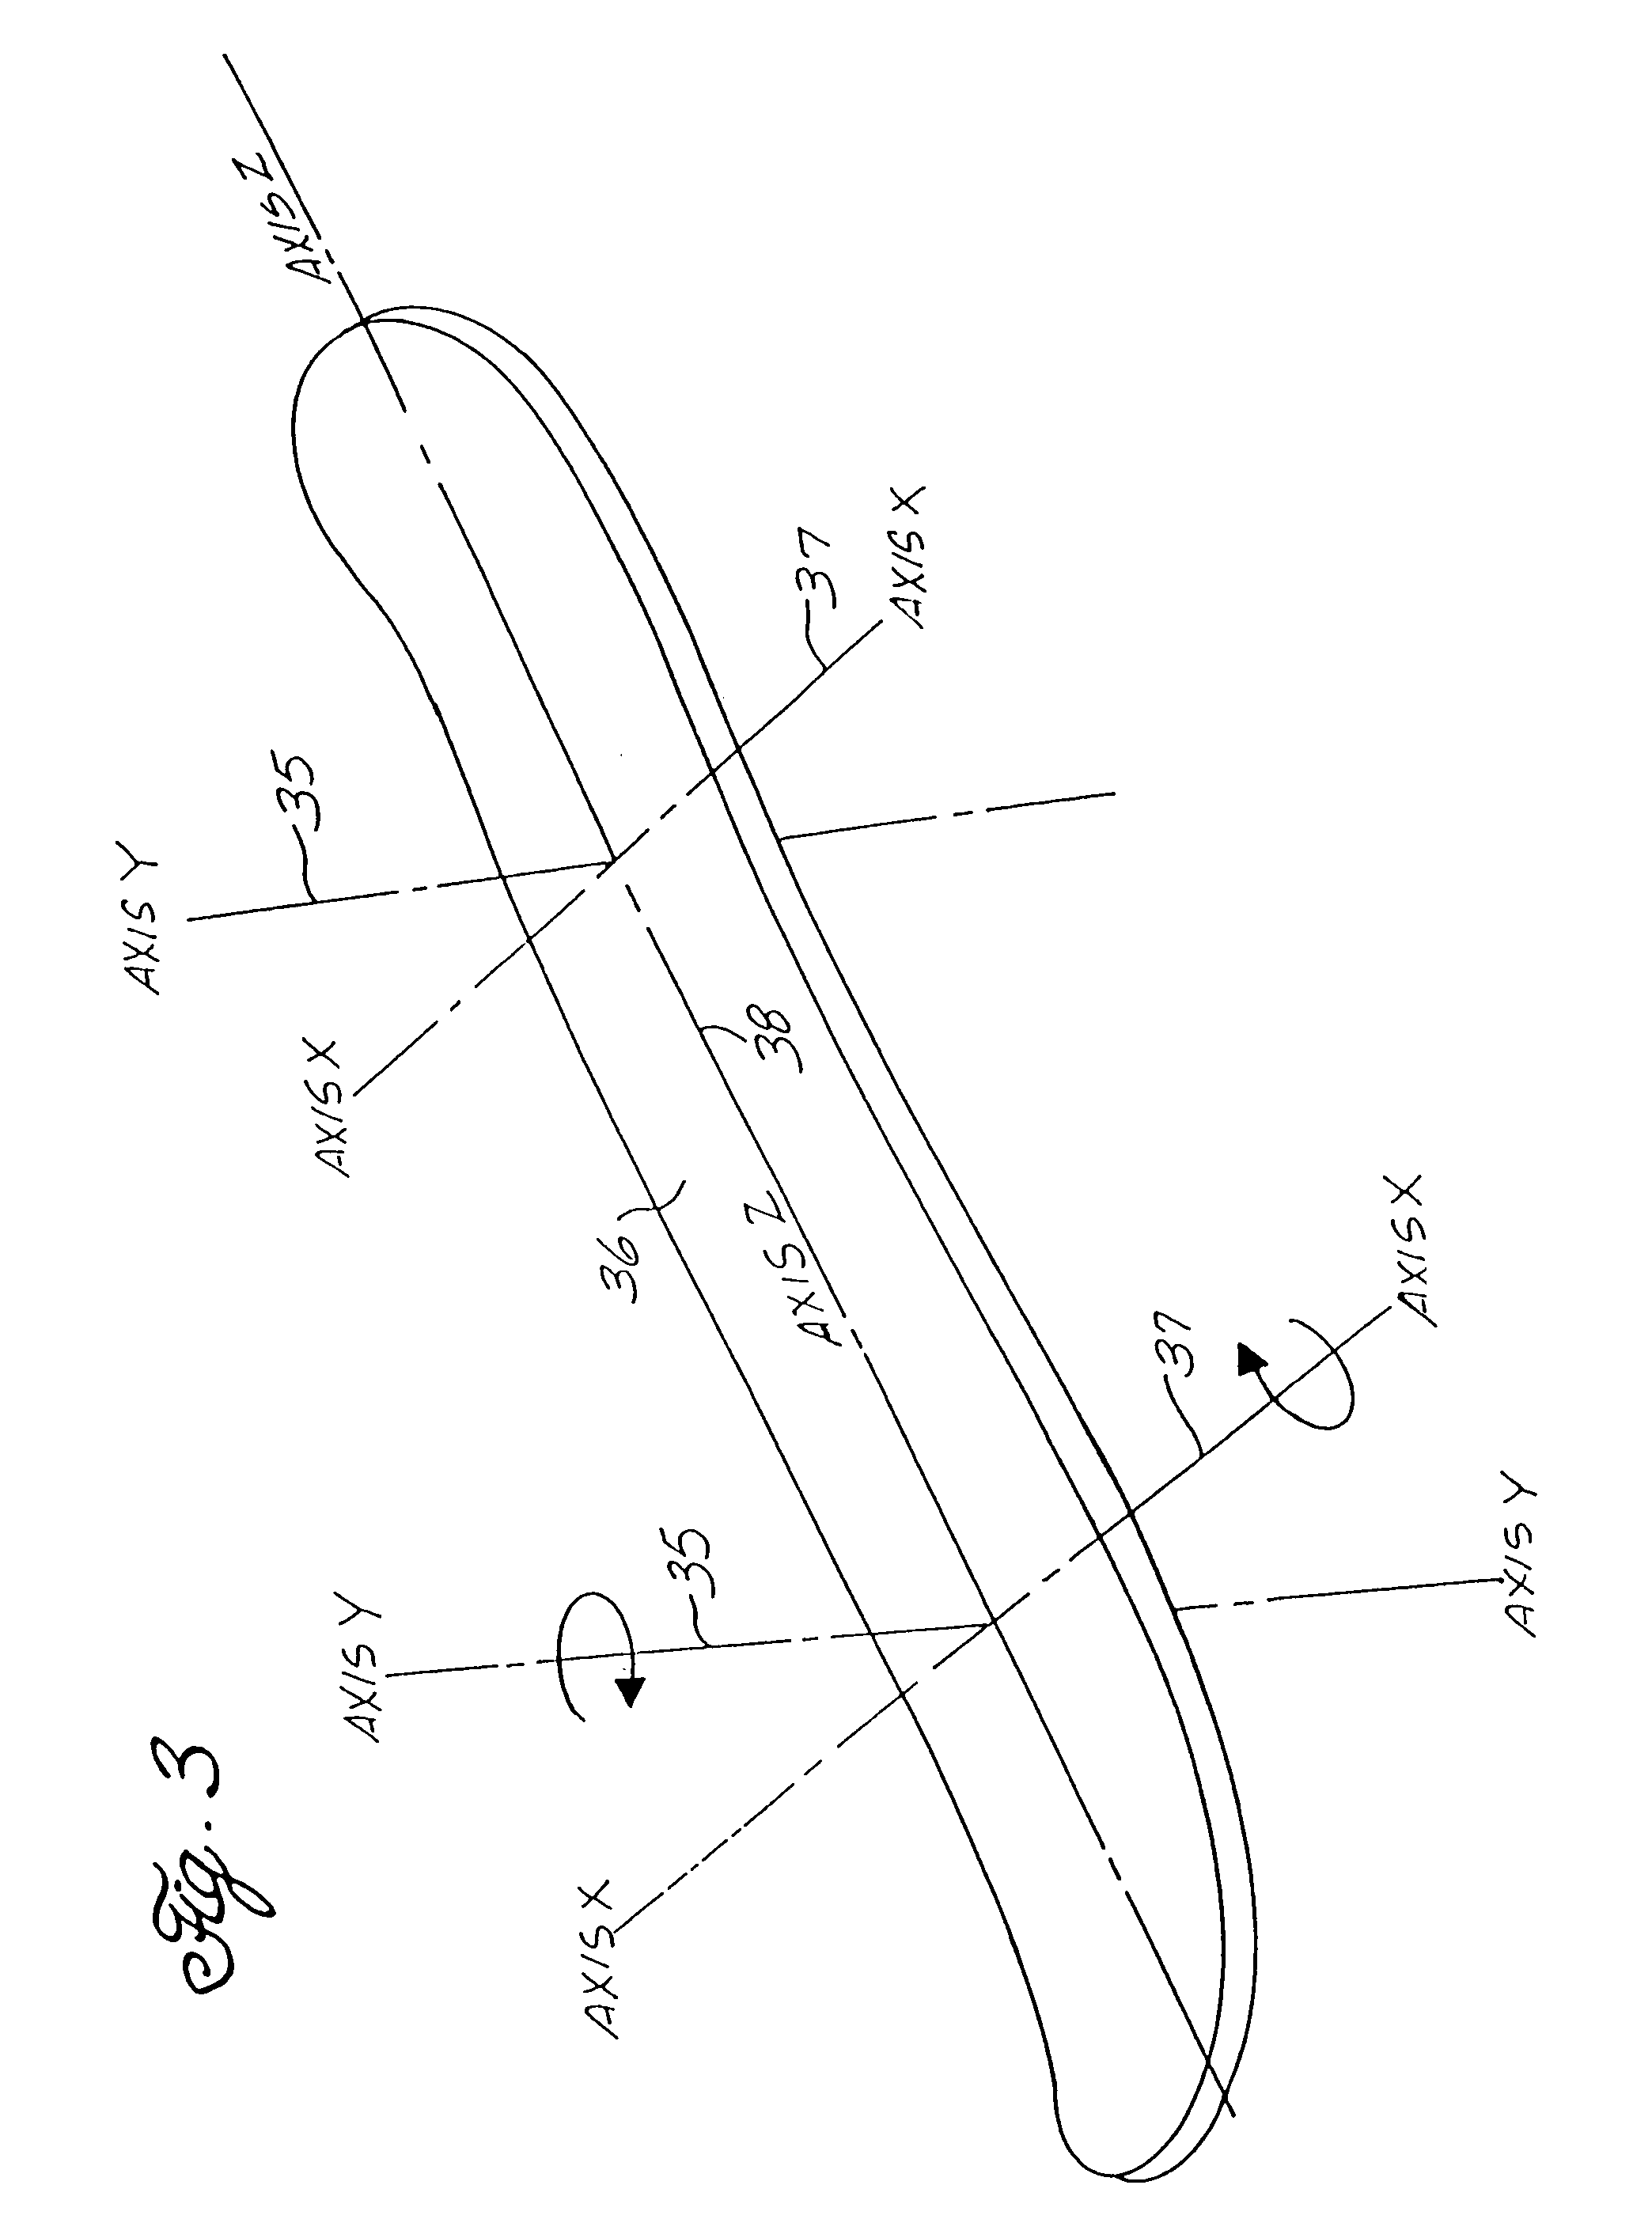 Freely rotatable binding for snowboarding and other single-board sports